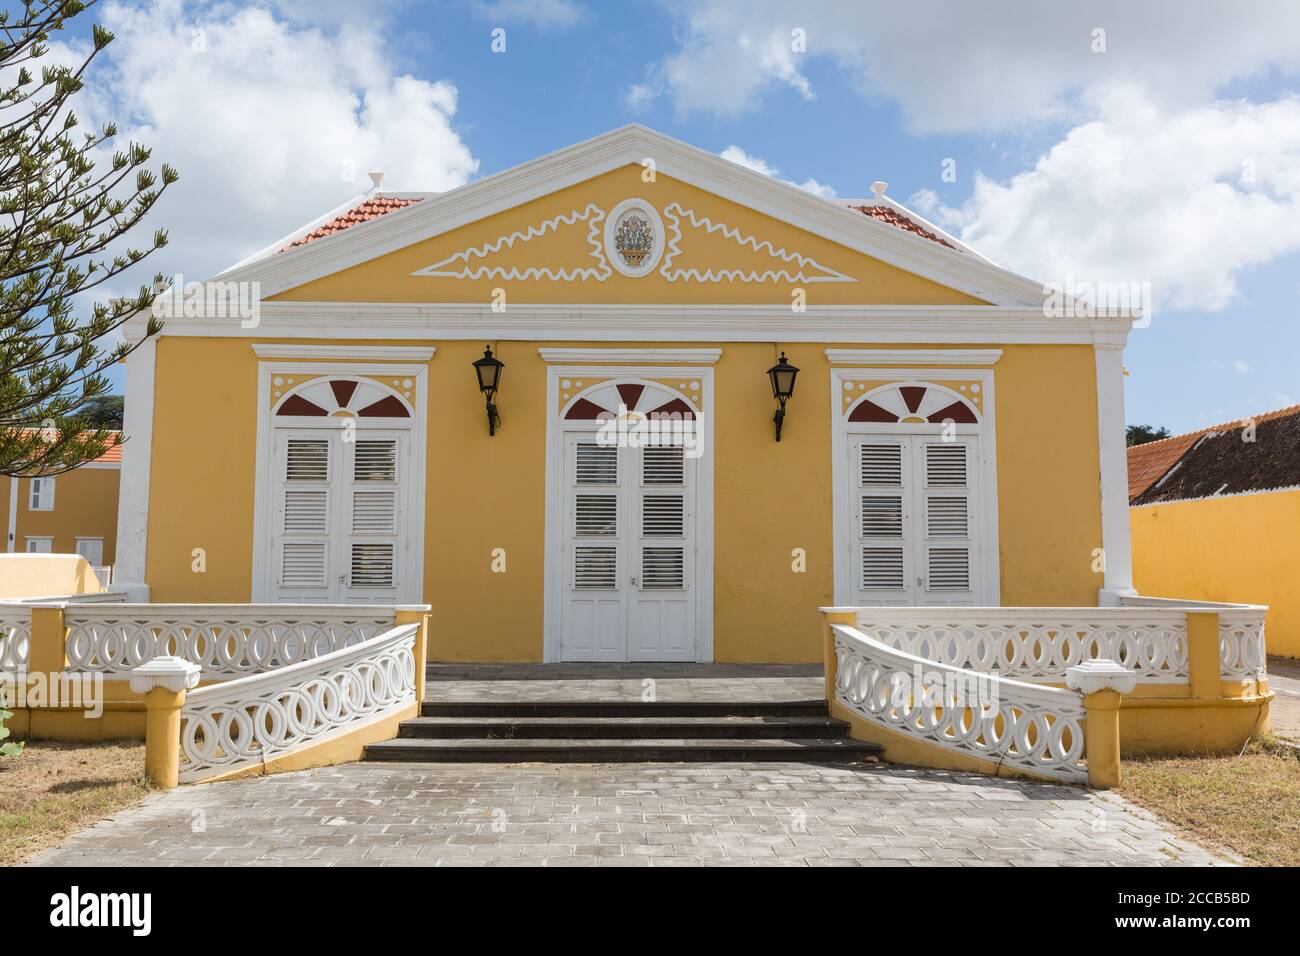 This is an historic house in the Scharloo section of the Punda District of Willemstad and was built in the late 1800's.  It now serves as government o Stock Photo